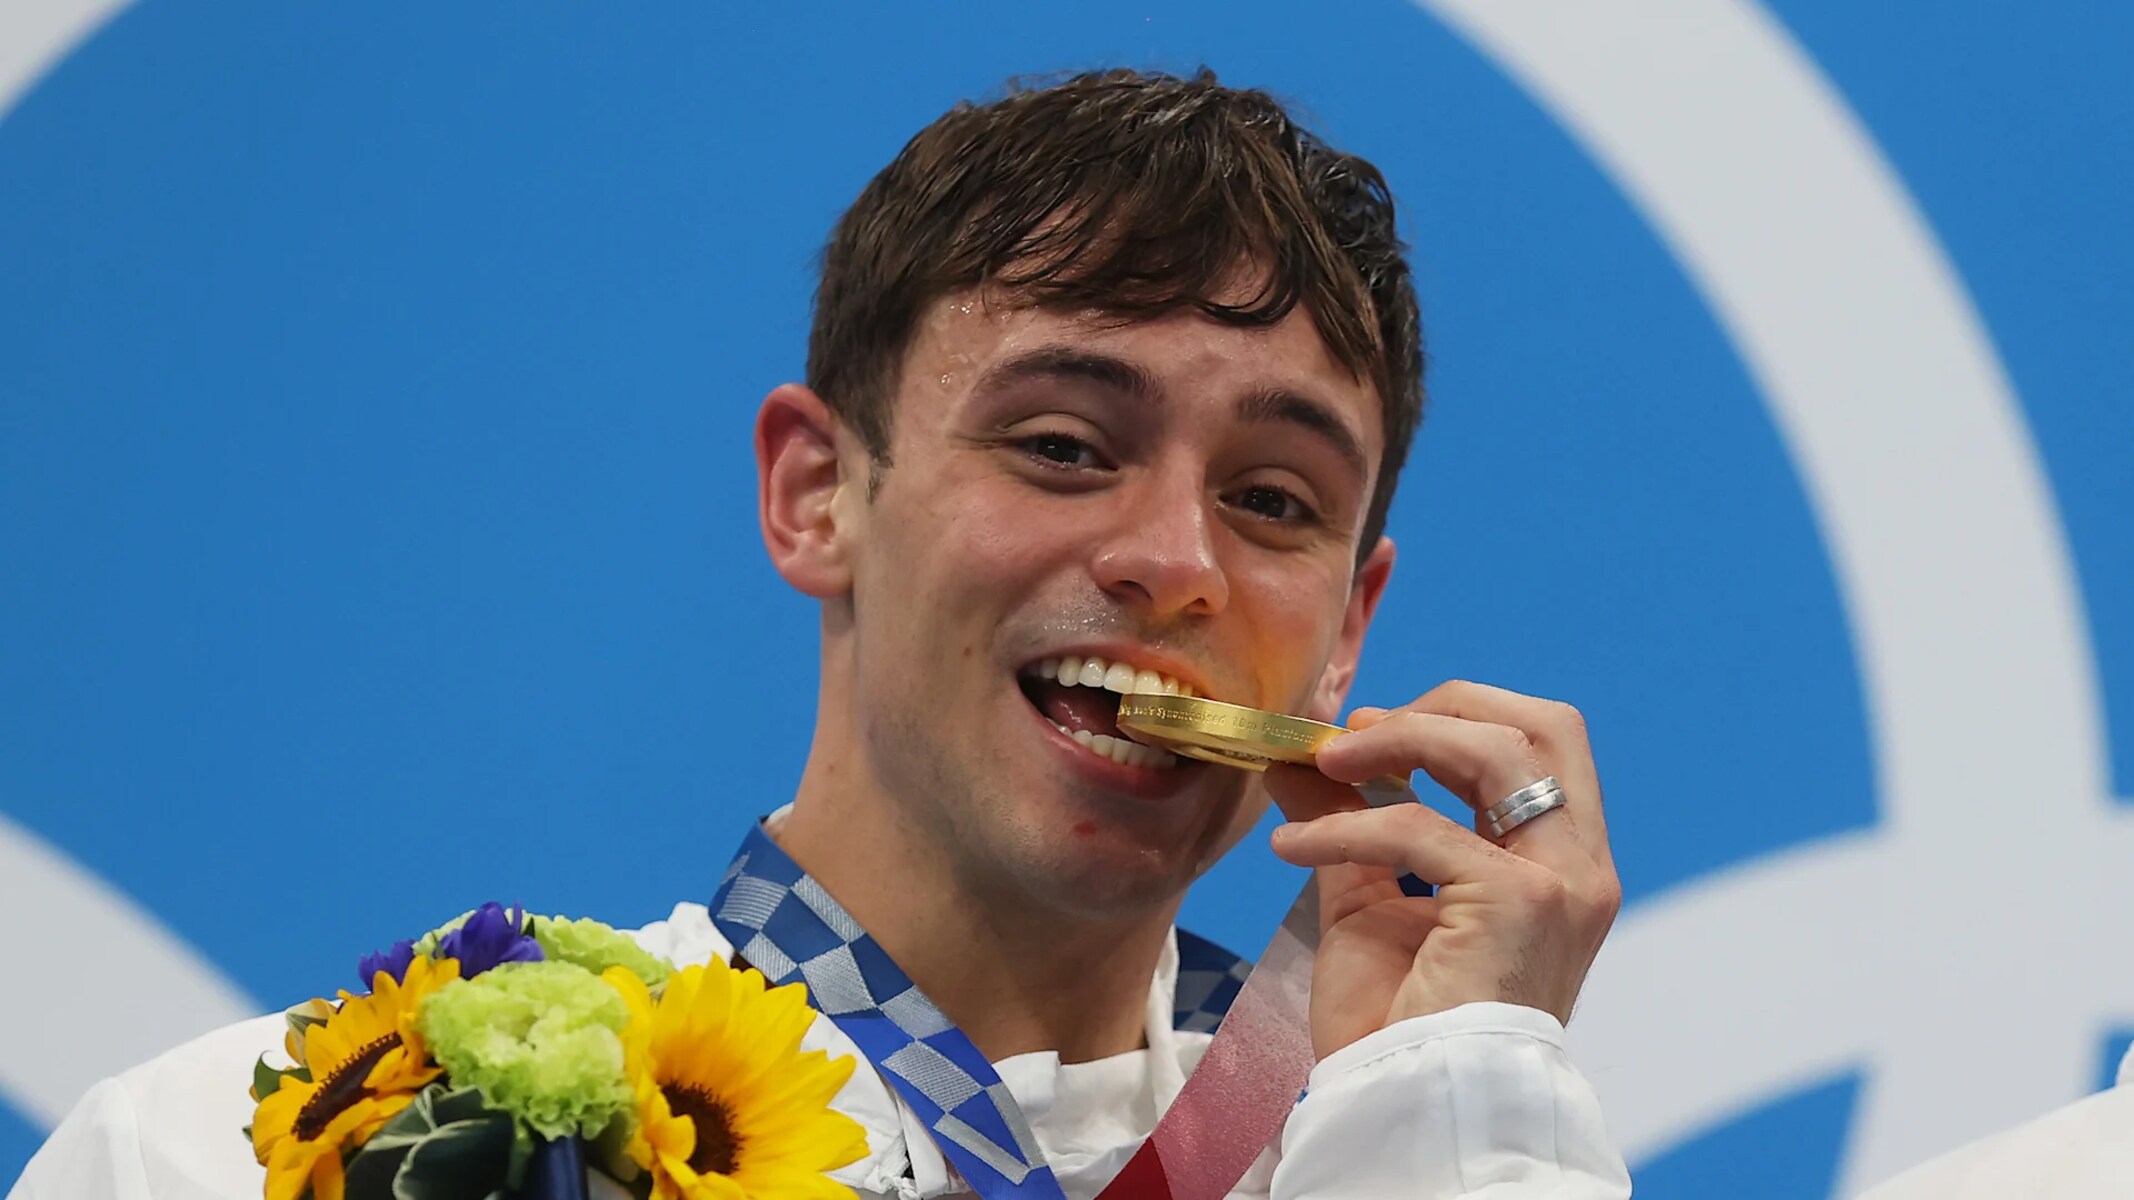 15 Unbelievable Facts About Tom Daley - Facts.net